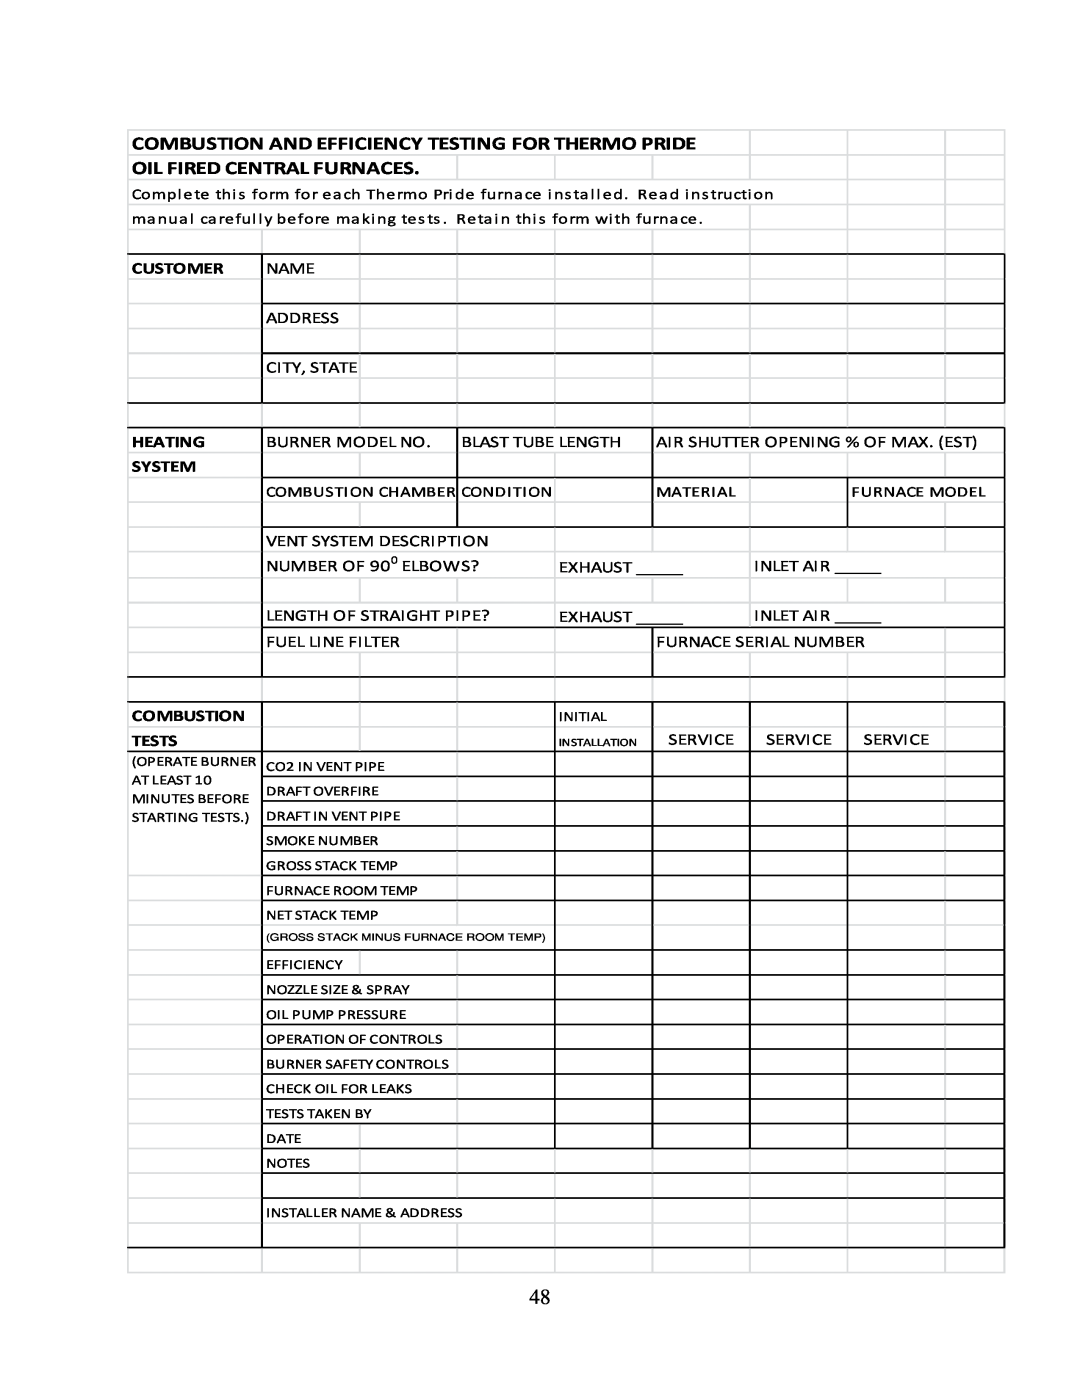 Thermo Products PHCFA072DV4R operation manual Oil Fired Central Furnaces, Customer, Heating System, Combustion, Tests 